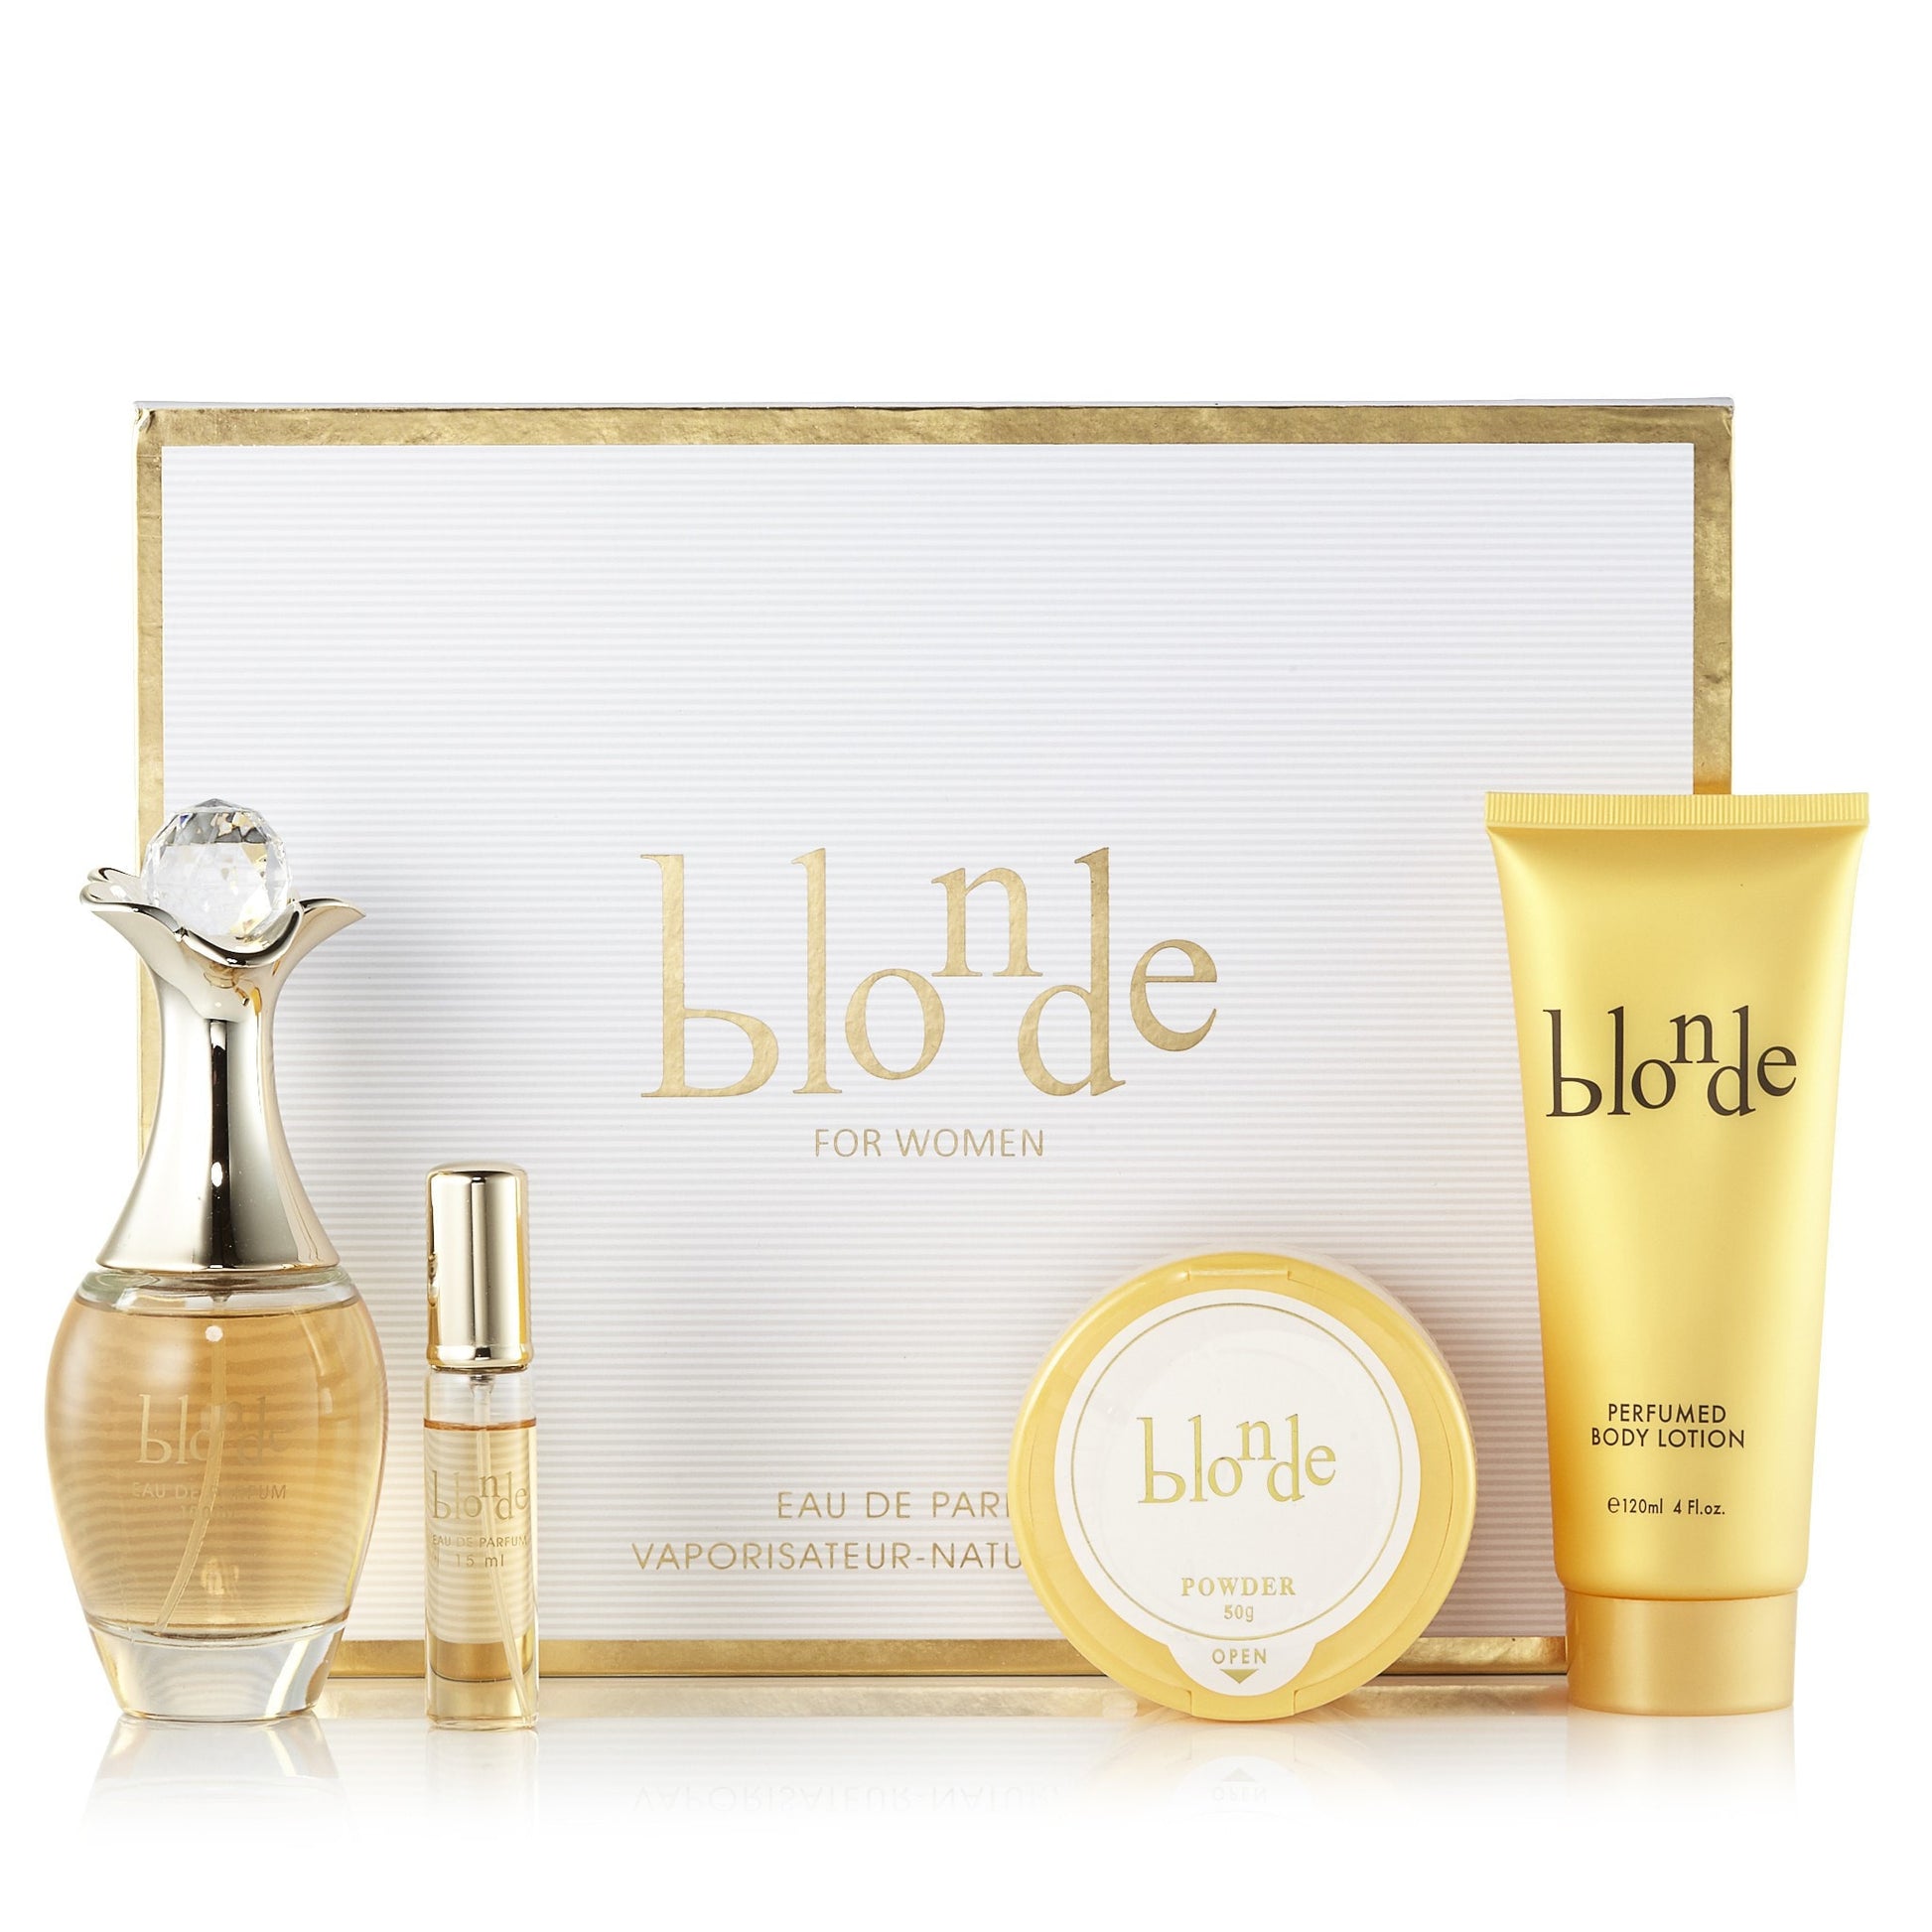 Blonde Set for Women 3.4 oz. Click to open in modal